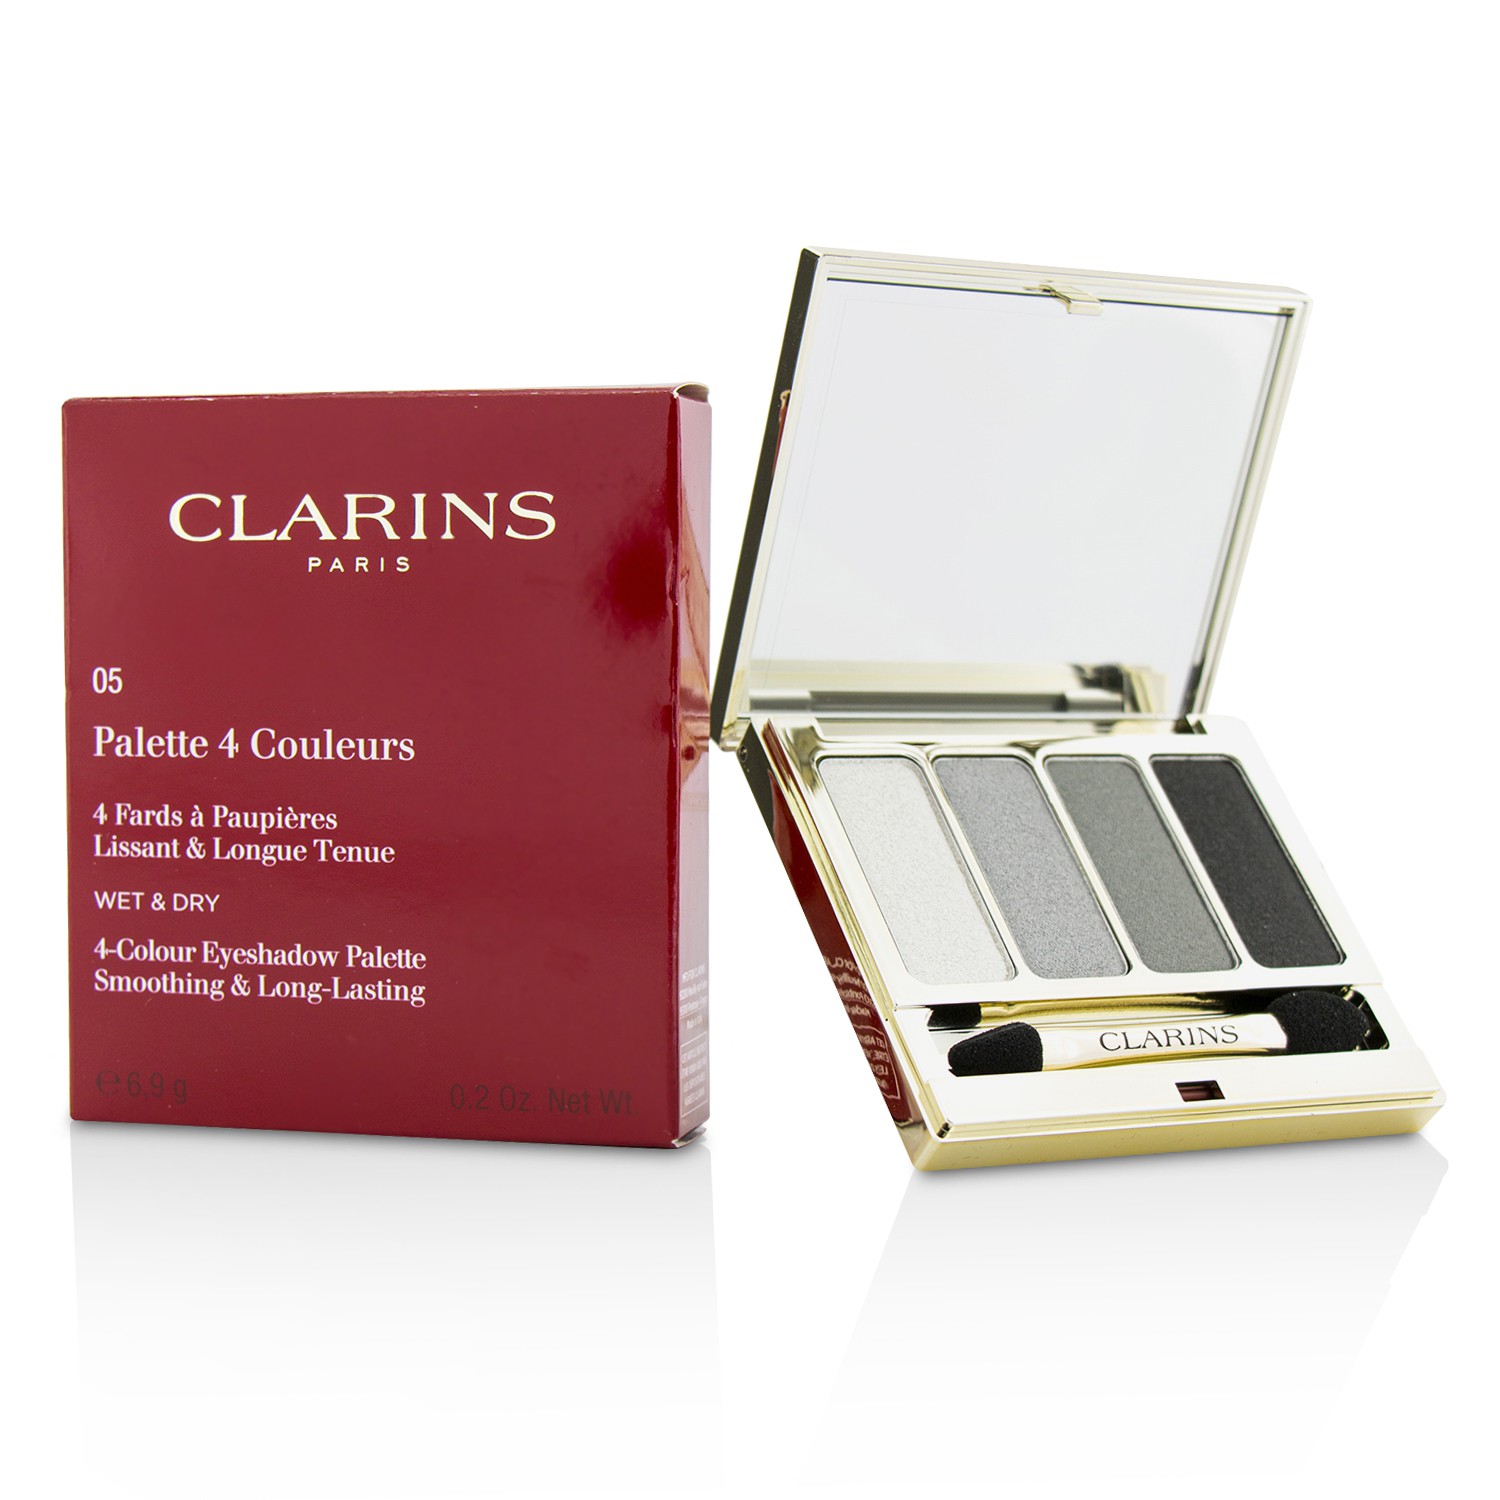 4 Colour Eyeshadow Palette (Smoothing & Long Lasting) - #05 Smoky Clarins Image